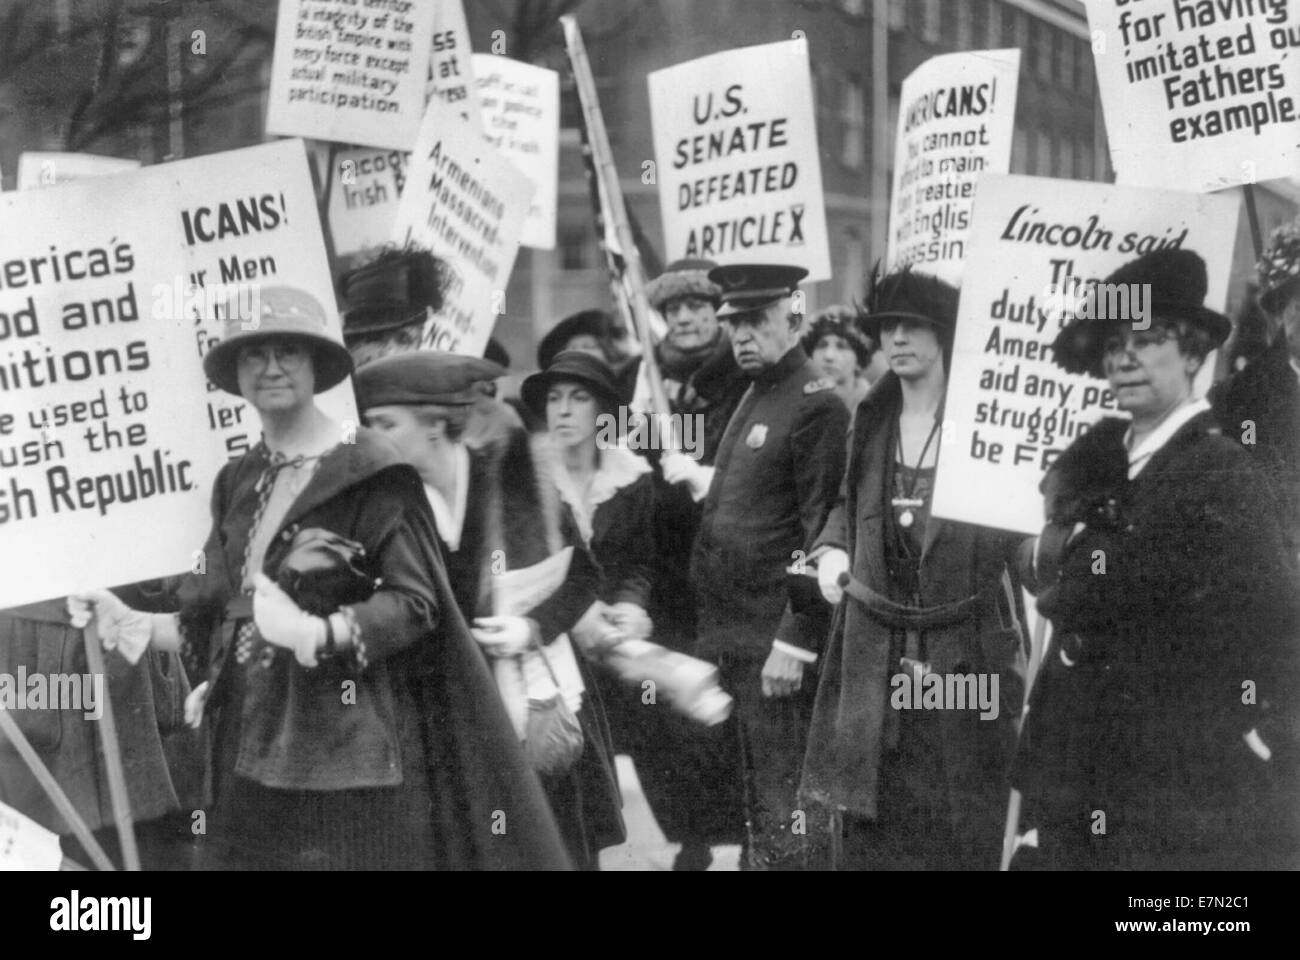 Picketers: America's Food and Munitions are used to crush the Irish Republic, Protest, circa 1920 Stock Photo